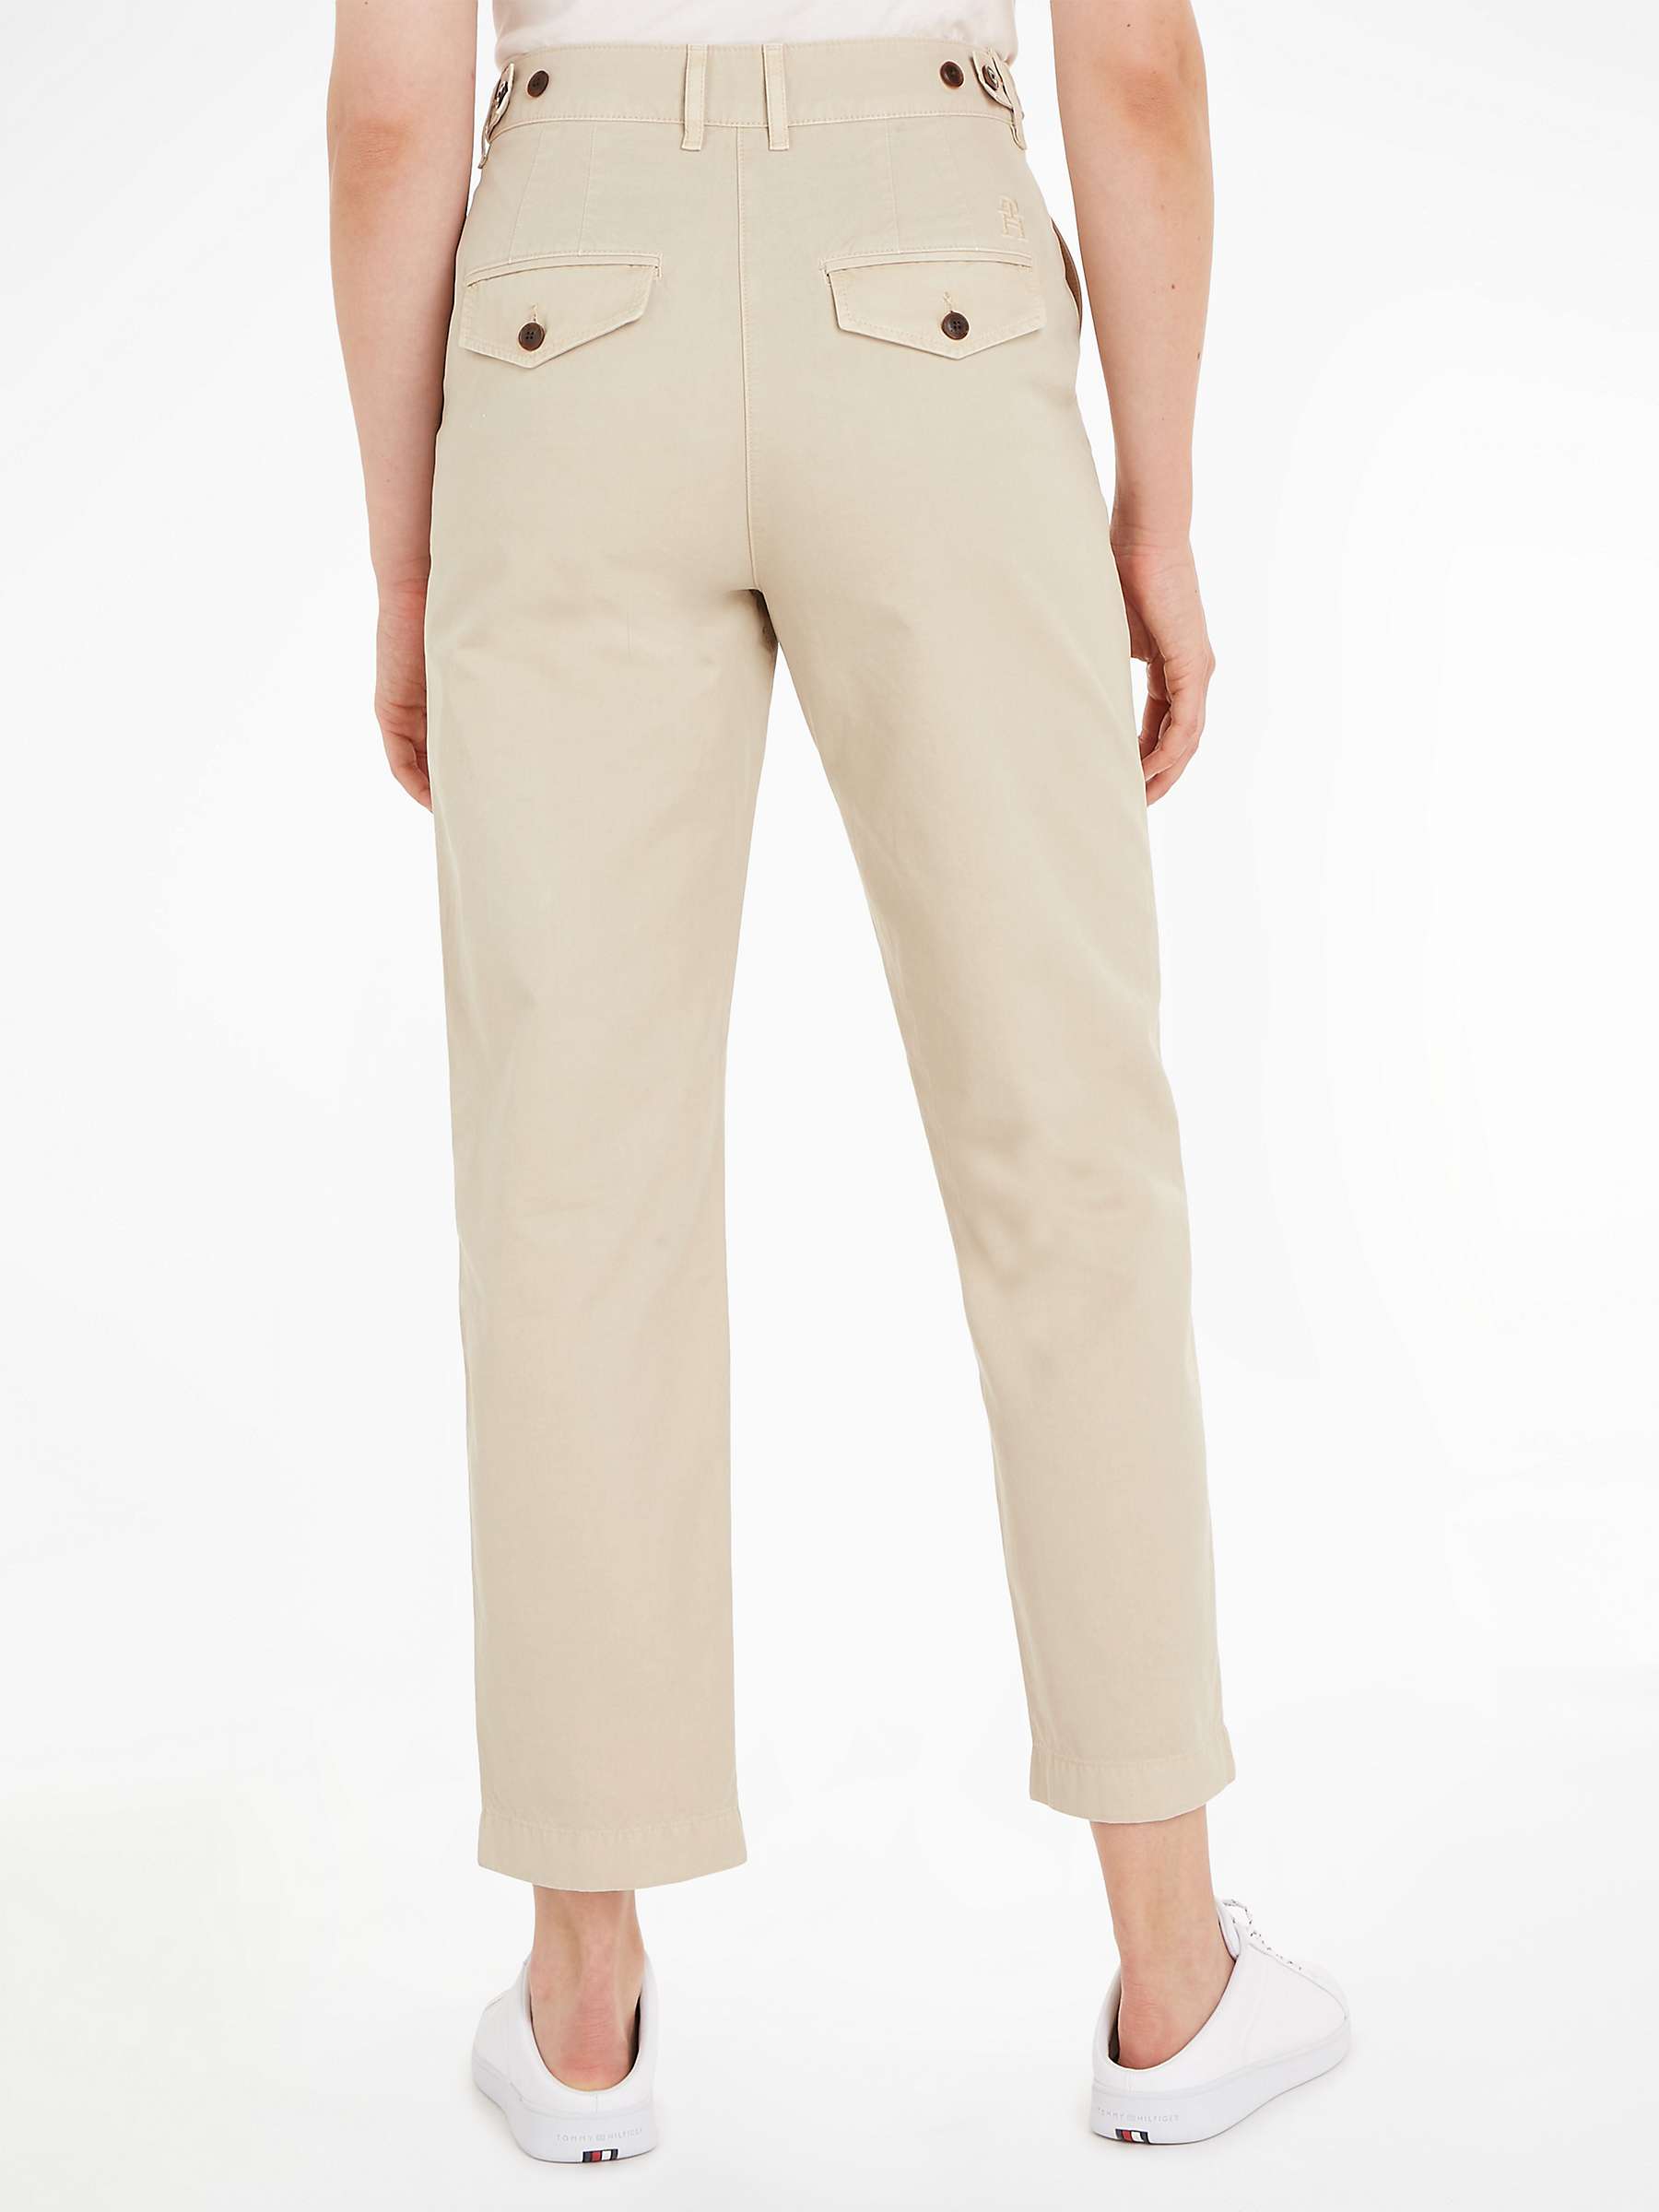 Tommy Hilfiger Tapered Chino Trousers, Light Sandalwood at John Lewis ...